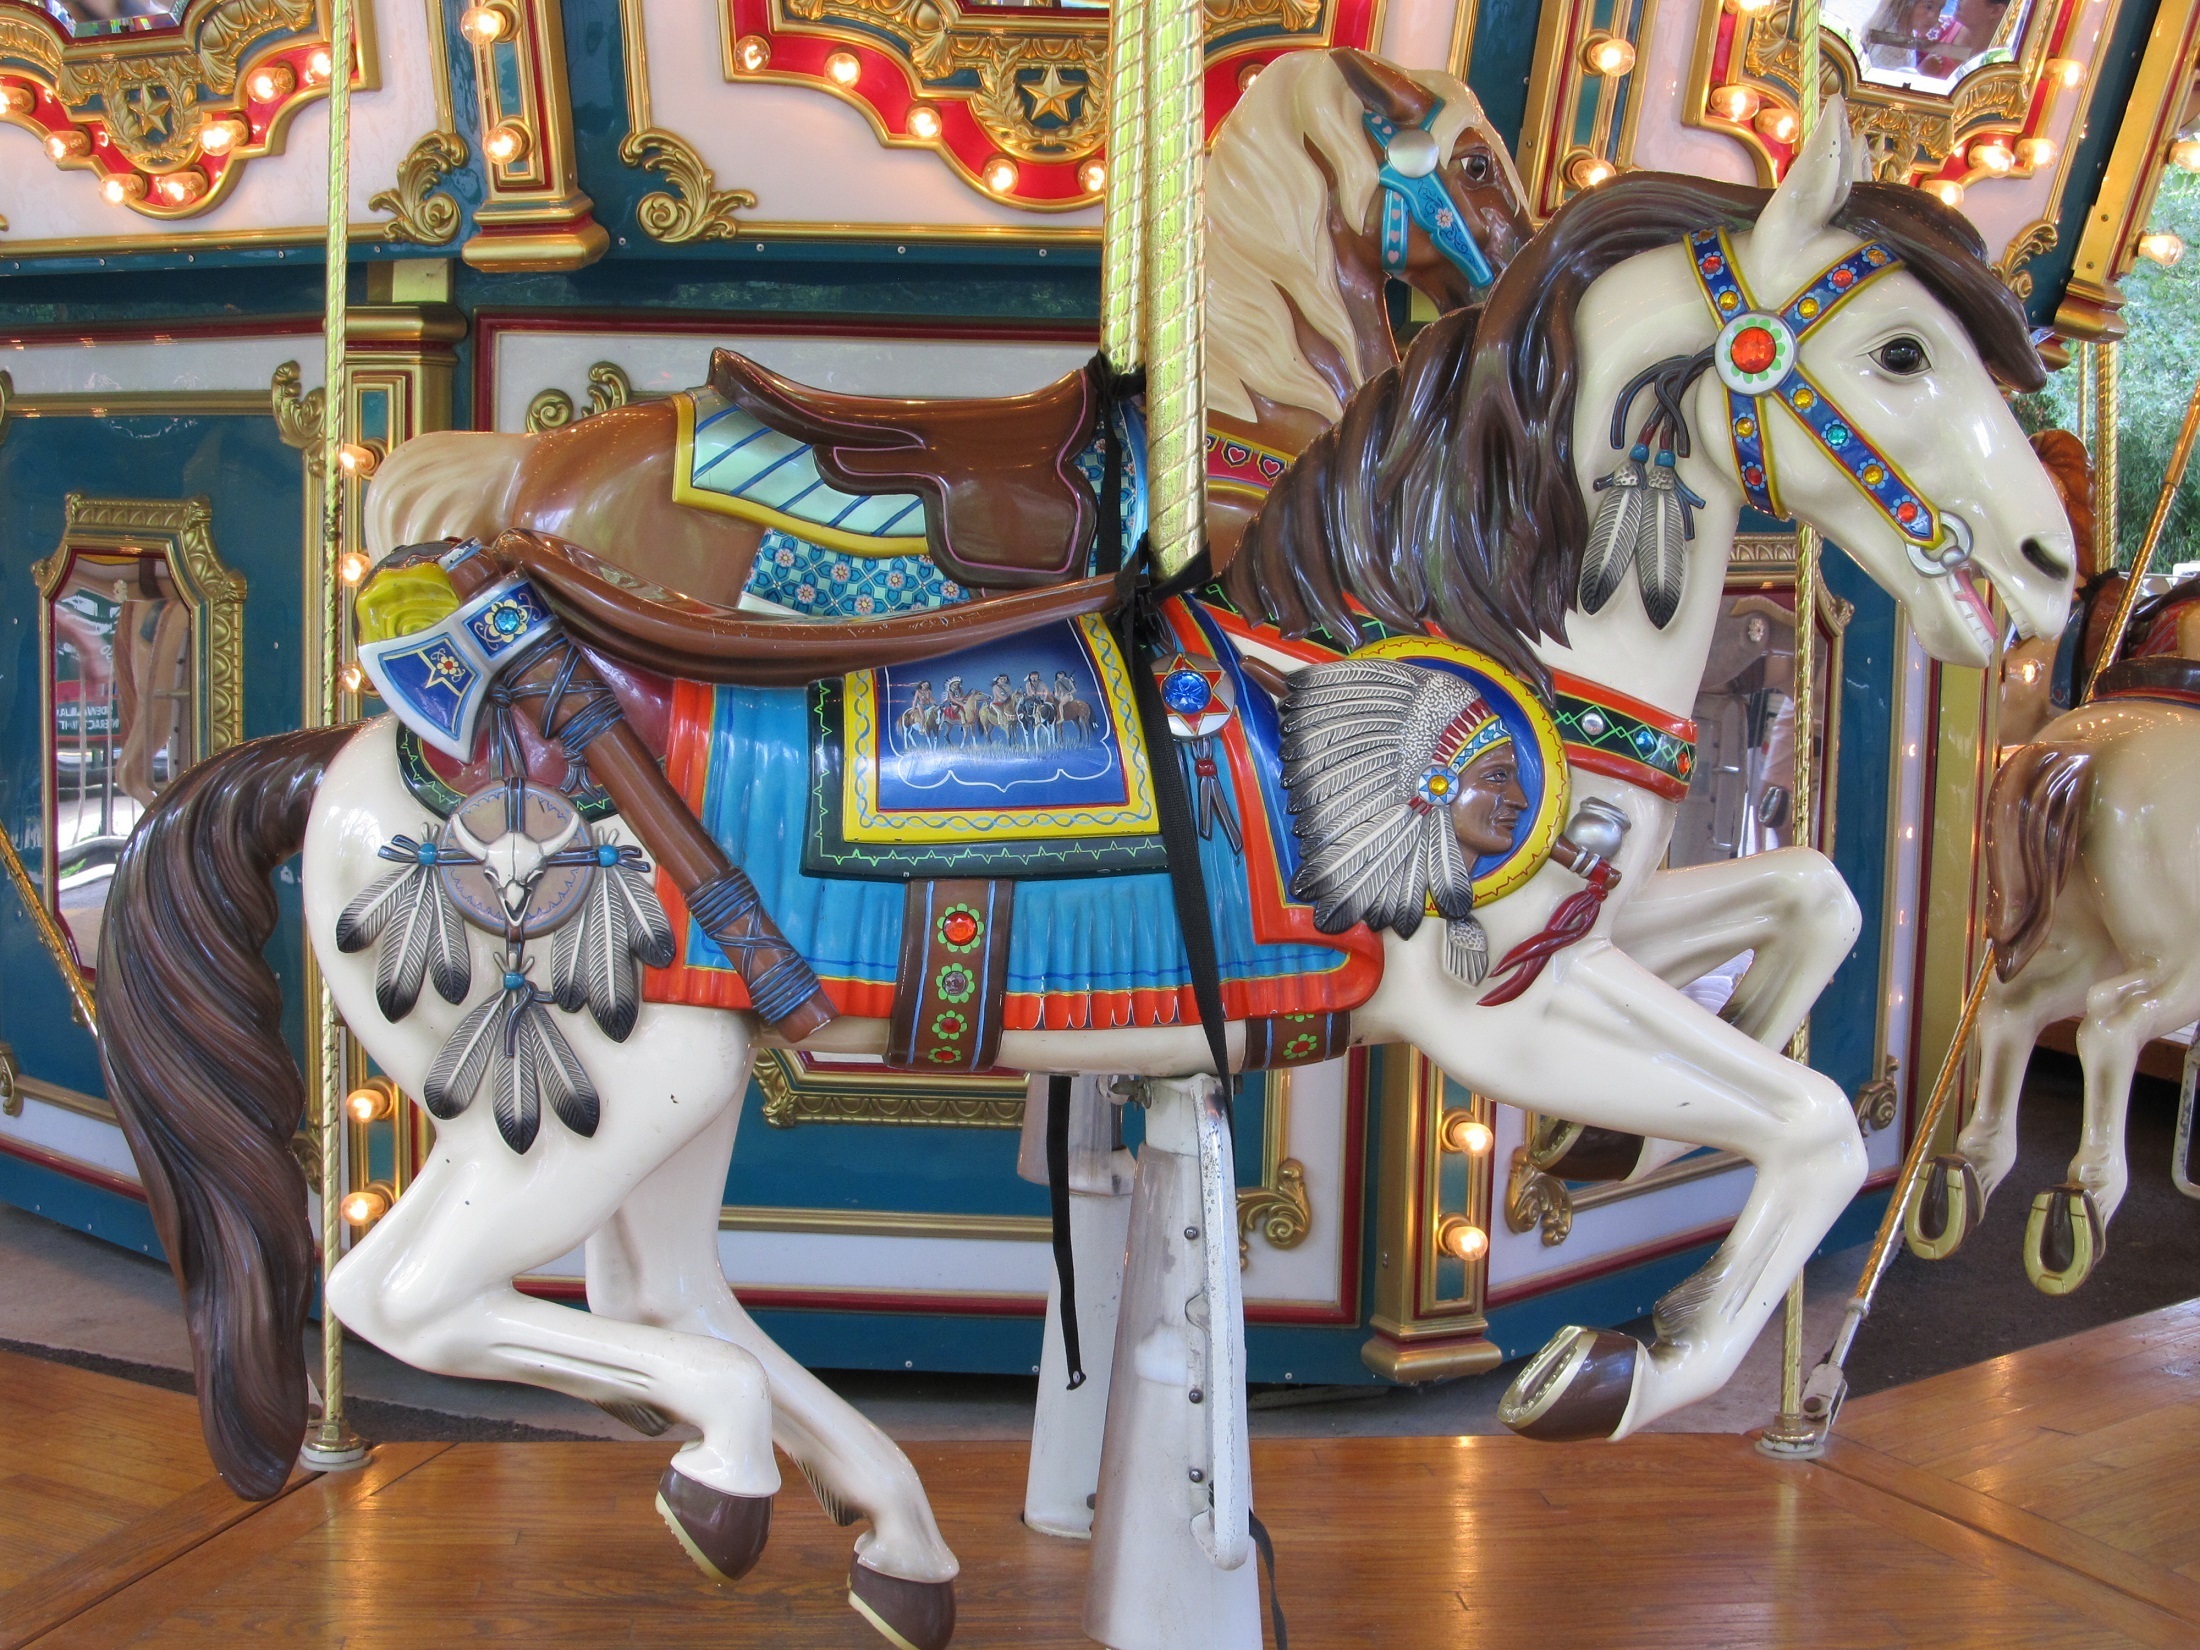 Free Images  Carousel